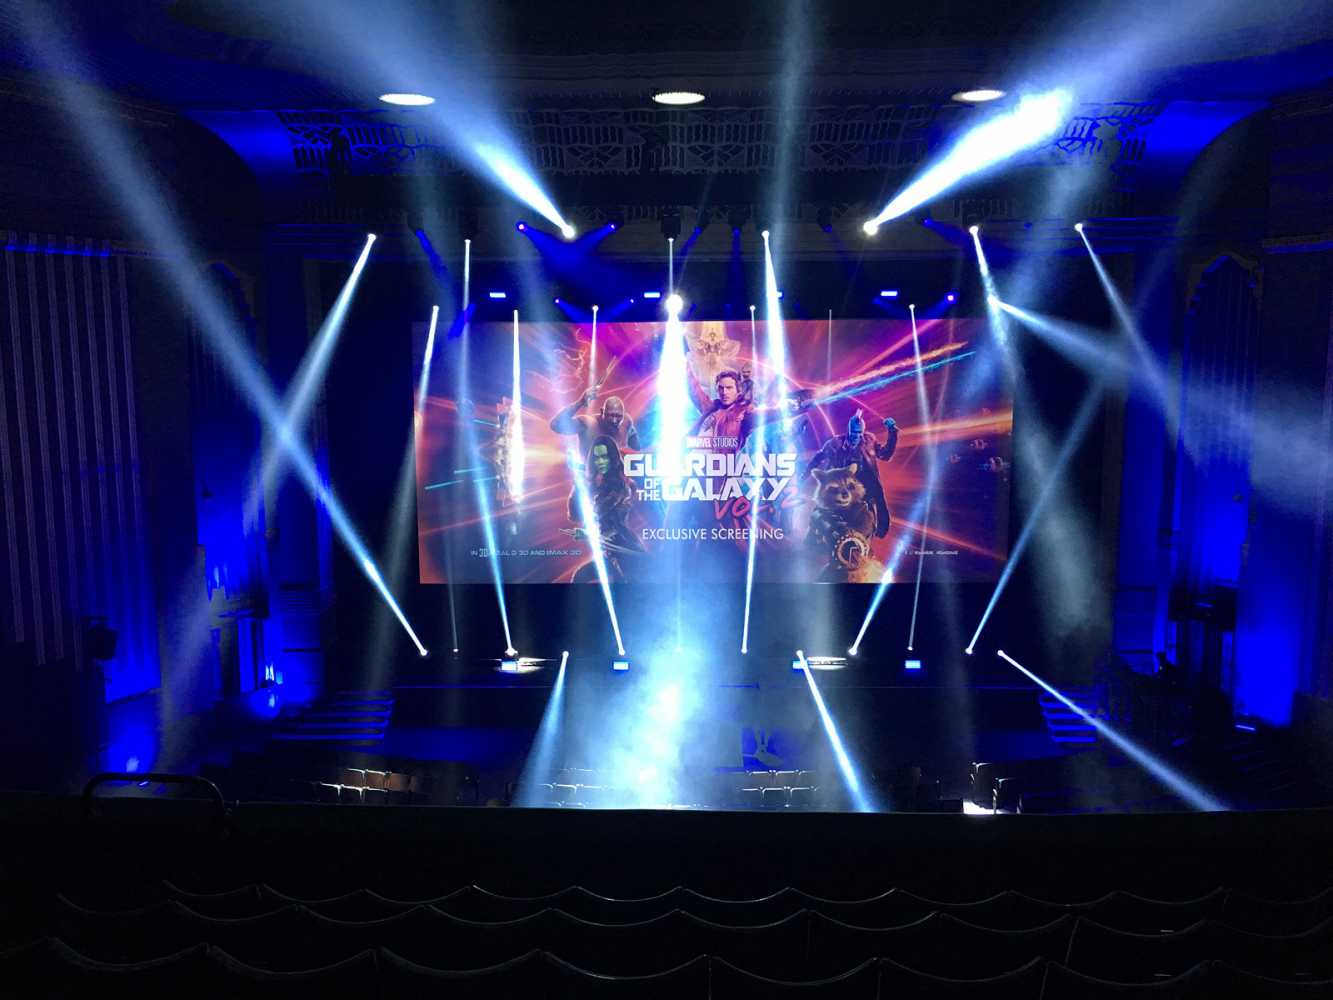 IPS supplied the lighting inside the theatre where the main event took place